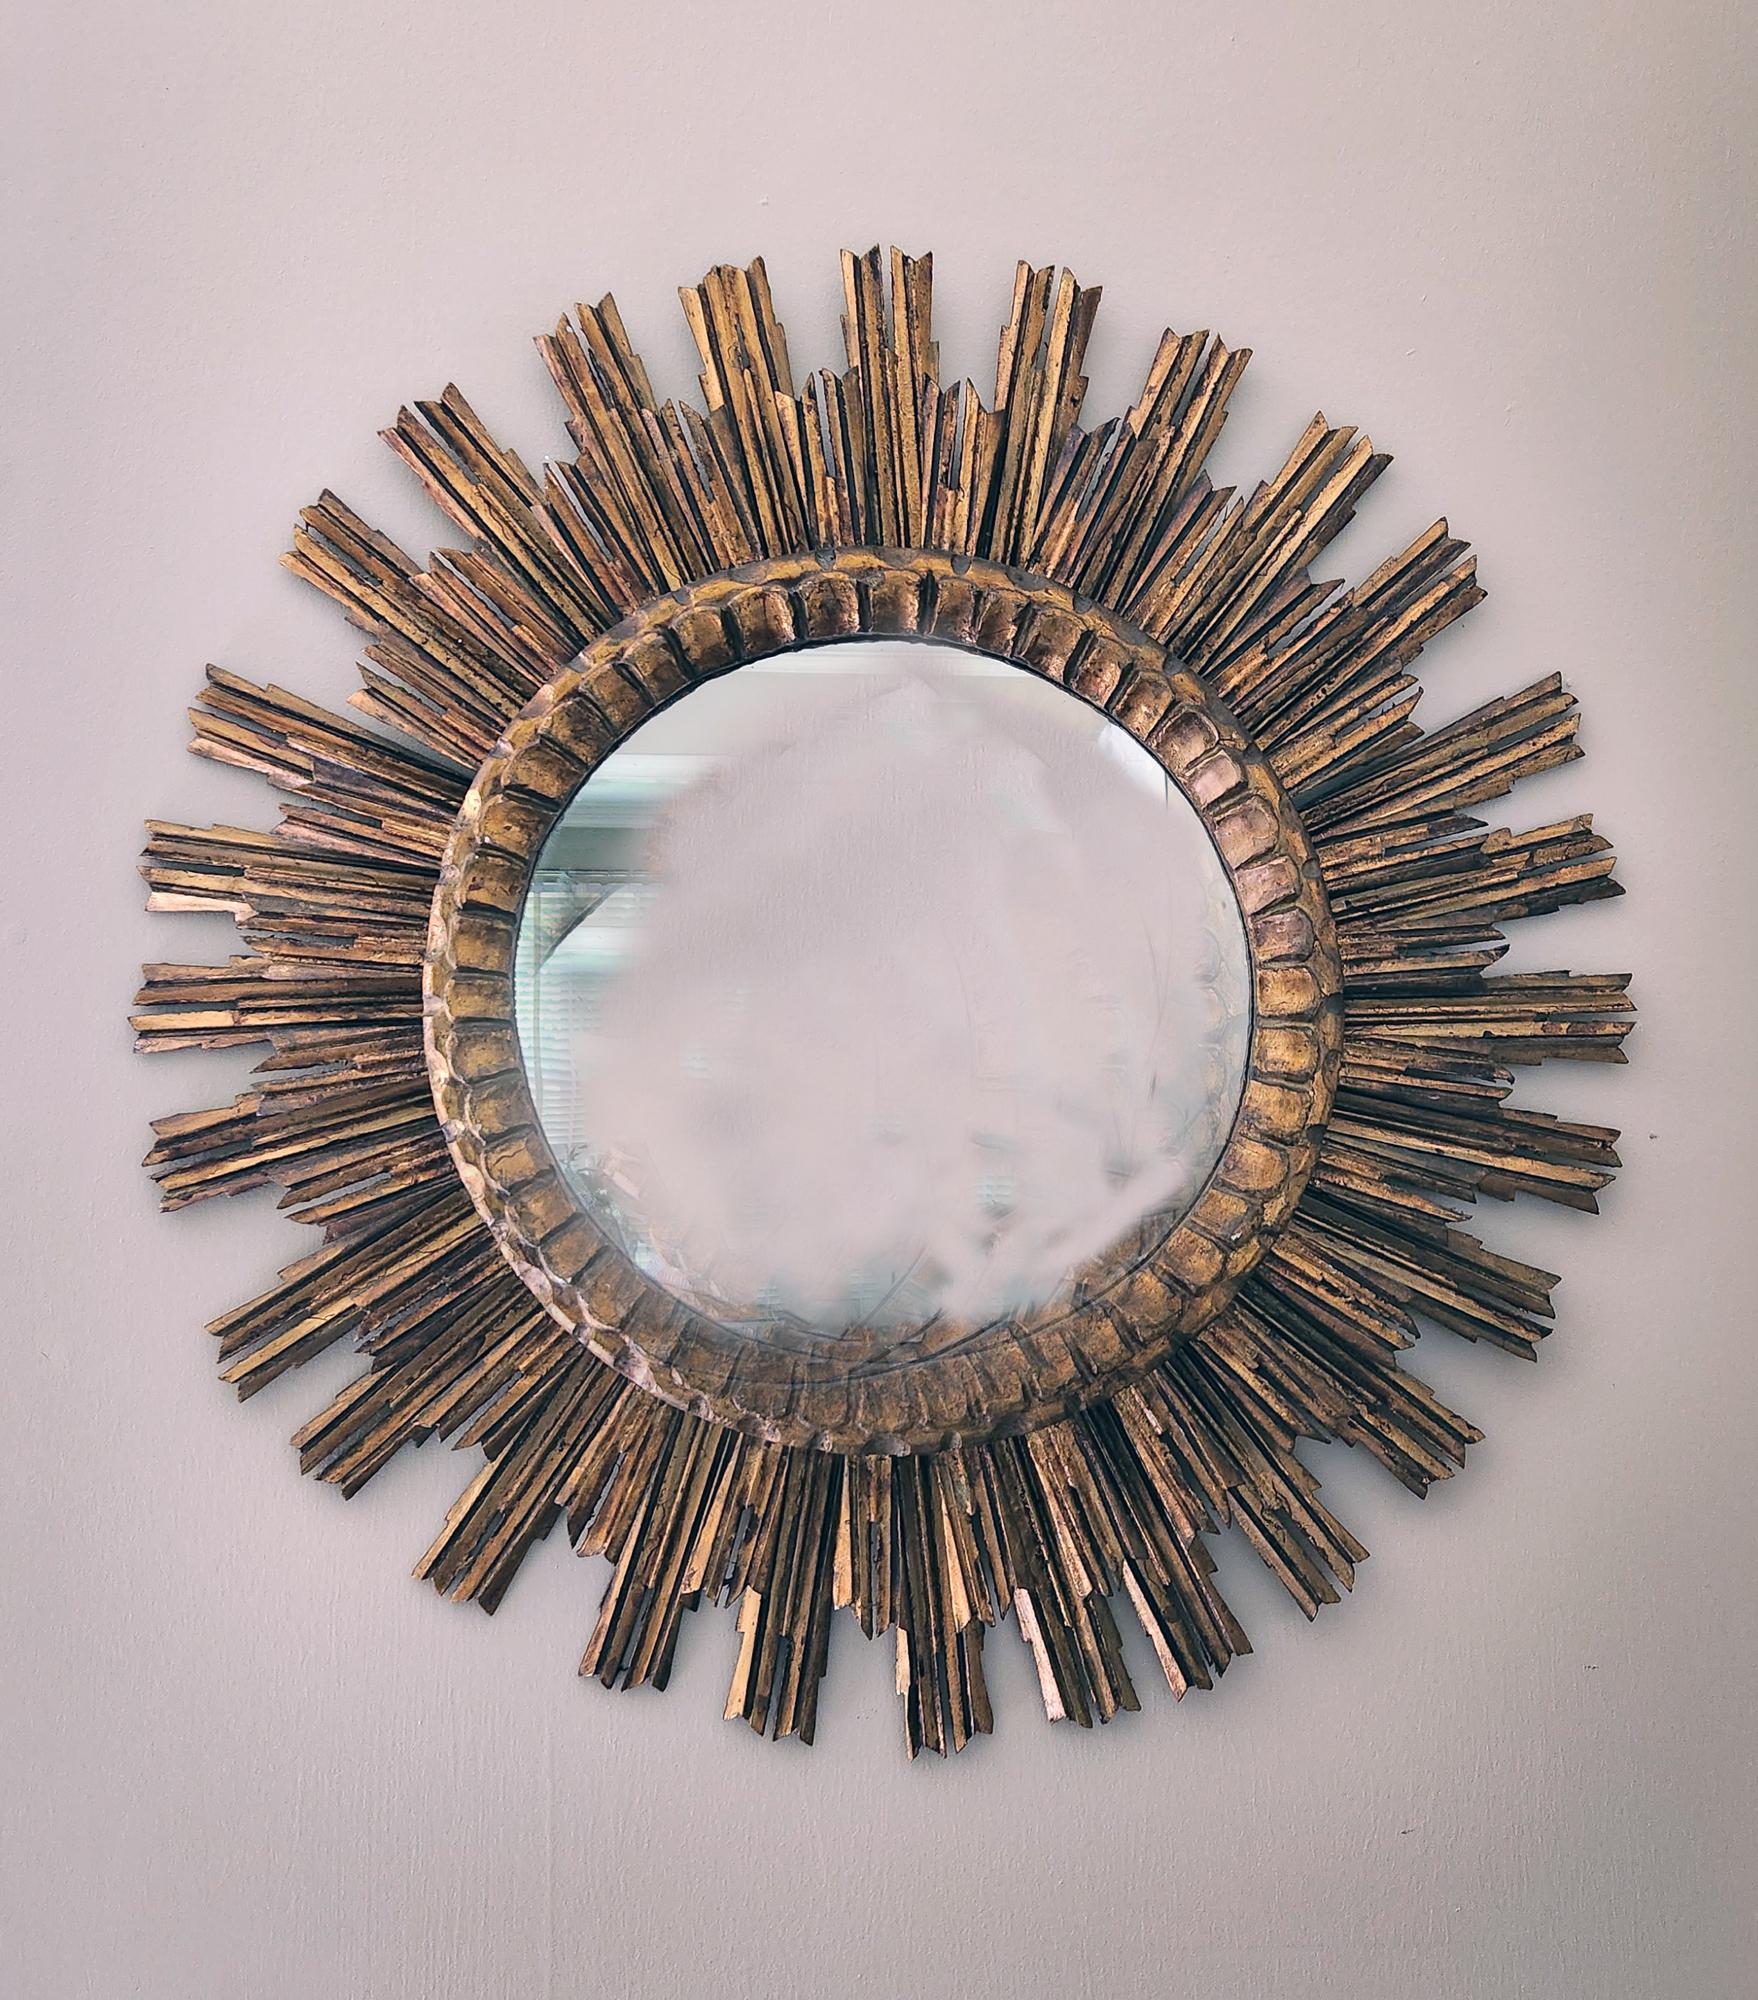 Vintage Sunburst Circular Giltwood Mirror,
Spanish,
1940s

A Spanish Baroque circular mirror with a double layered surround of shaped sun rays with overlapping radiating leaves meticulously arranged around the central mirror.

Dimensions: 29 inch